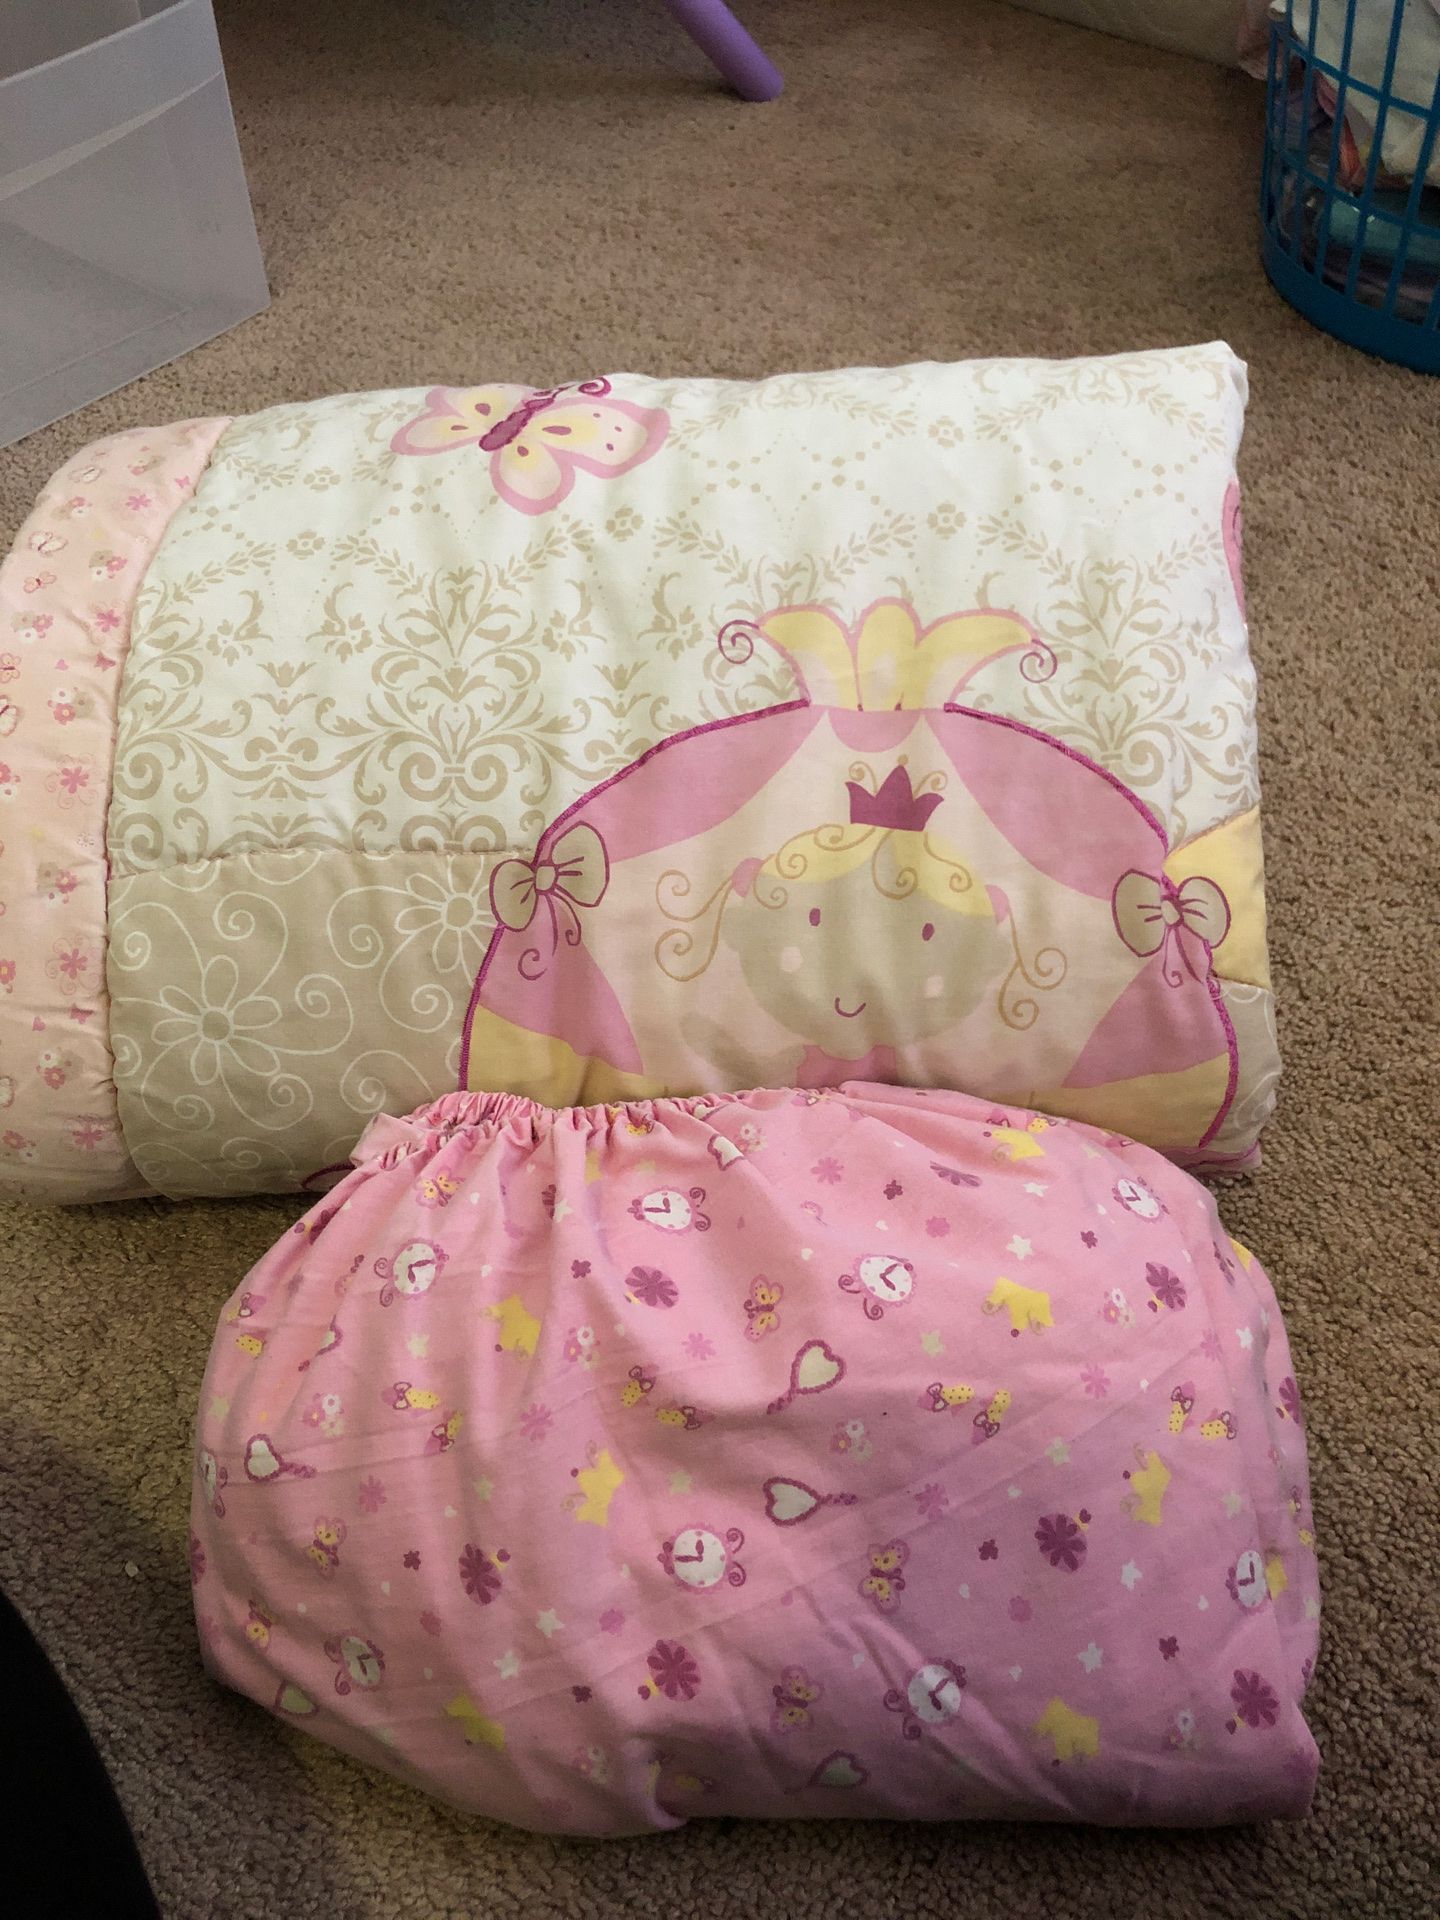 Crib size/Toddler bed sheet cover and thick blanket.